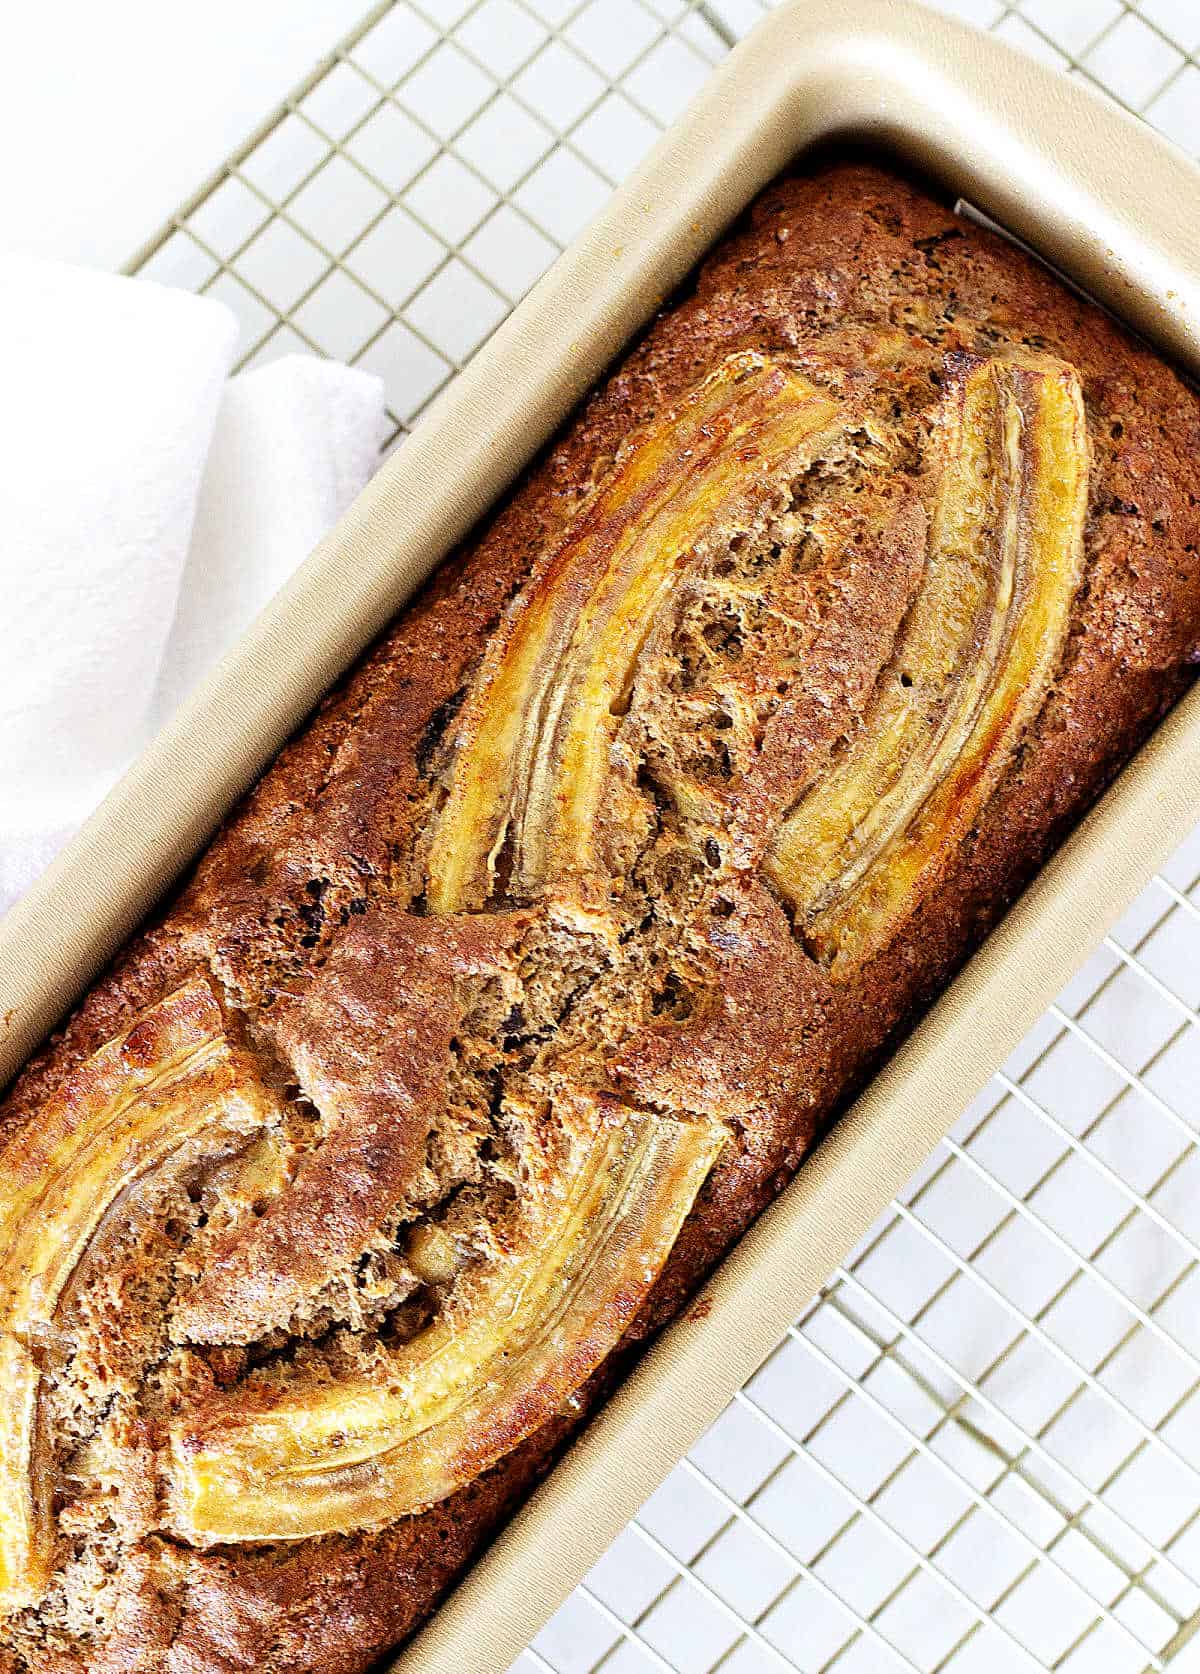 Top view of banana bread in metal pan on white kitchen towel.